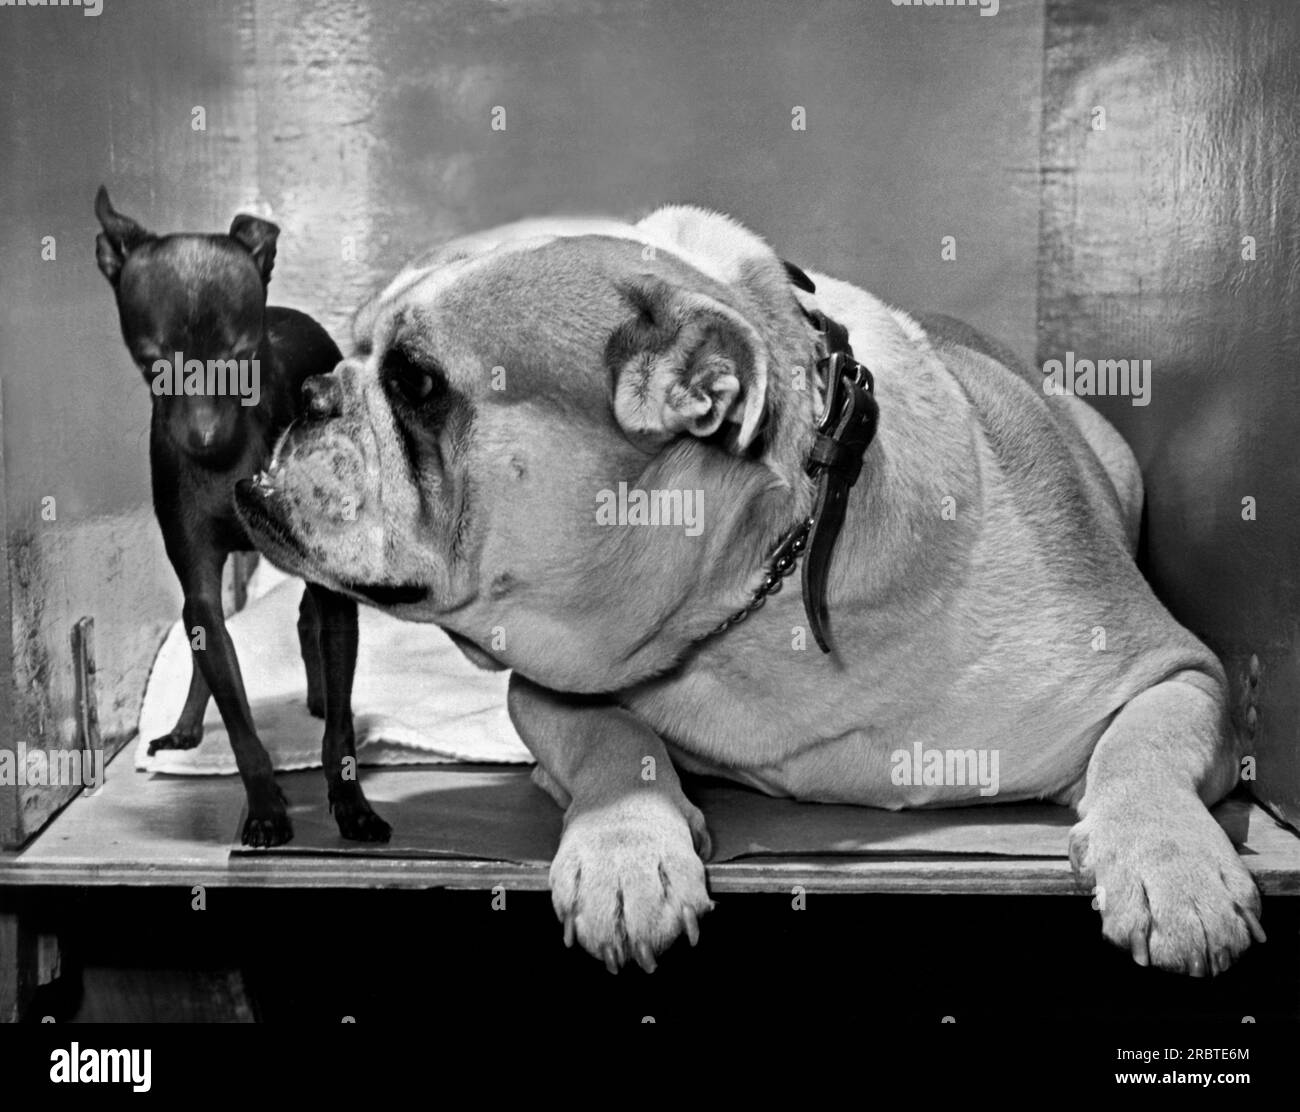 St. Louis, MIssouri:  1947. 'Lady Whiz's Butch', the English Bulldog, wants all of center stage, while shy but standing his ground is 'Black NIght', a toy Manchester Terrier puppy. Stock Photo